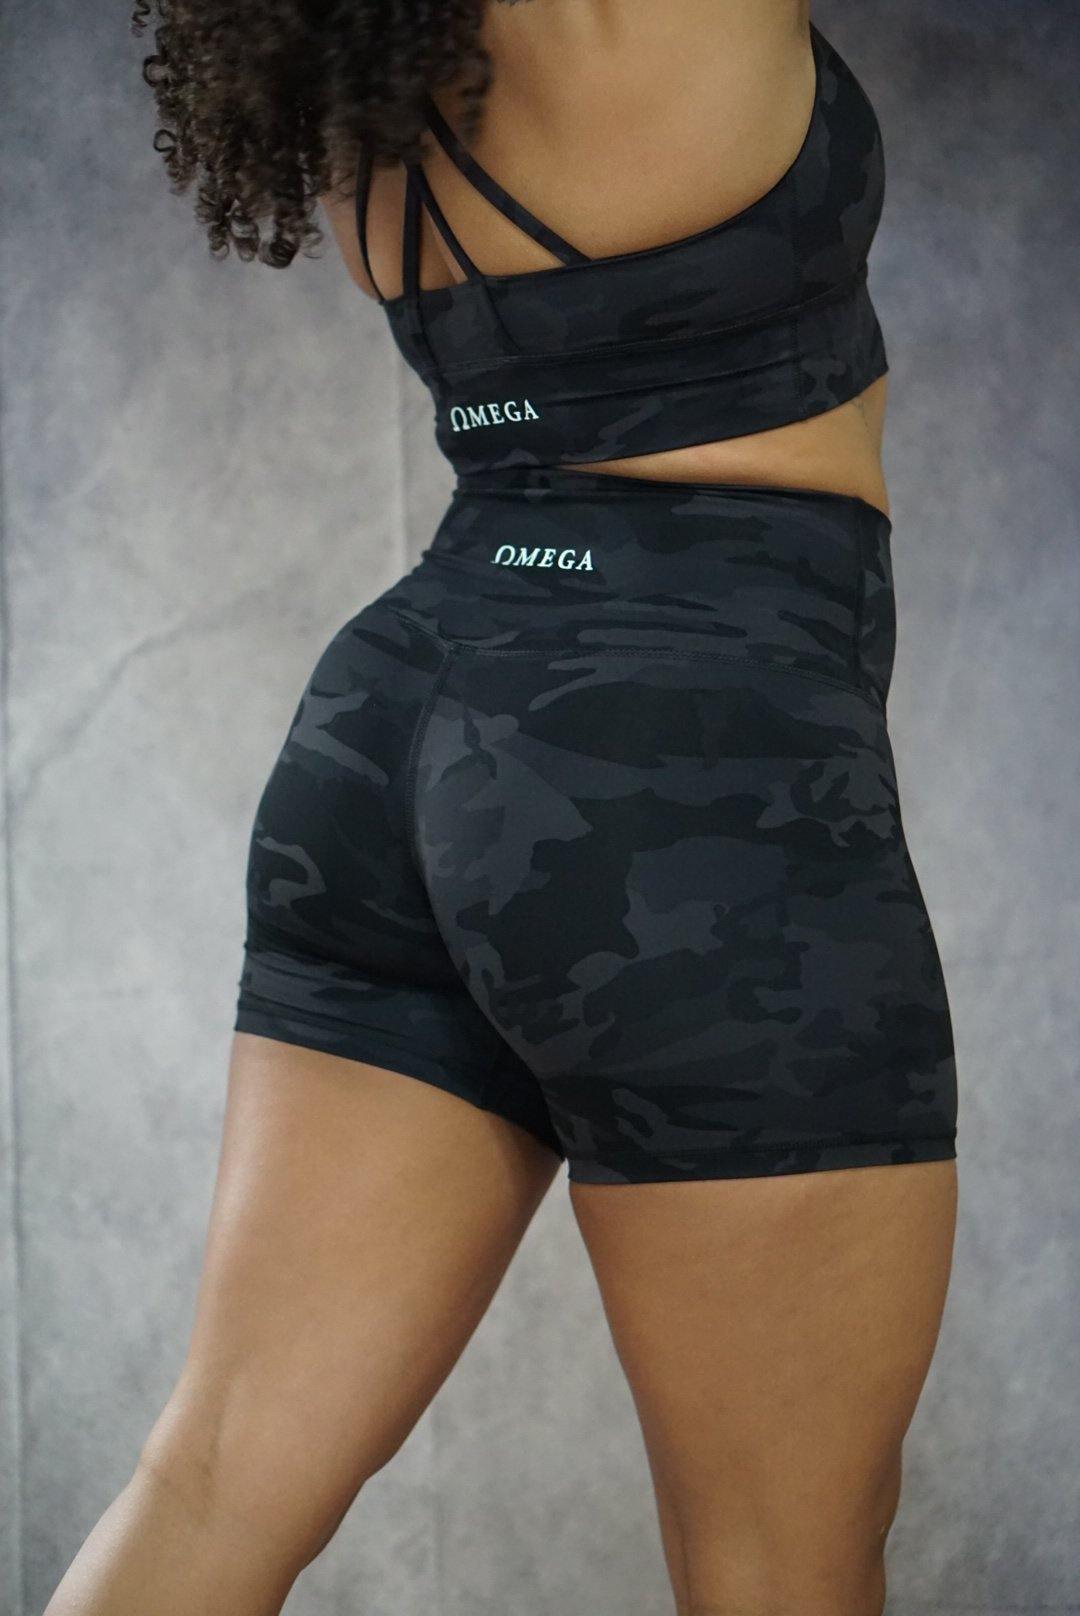 Absolute Camo Shorts - The Omega Fitness Workout Apparel